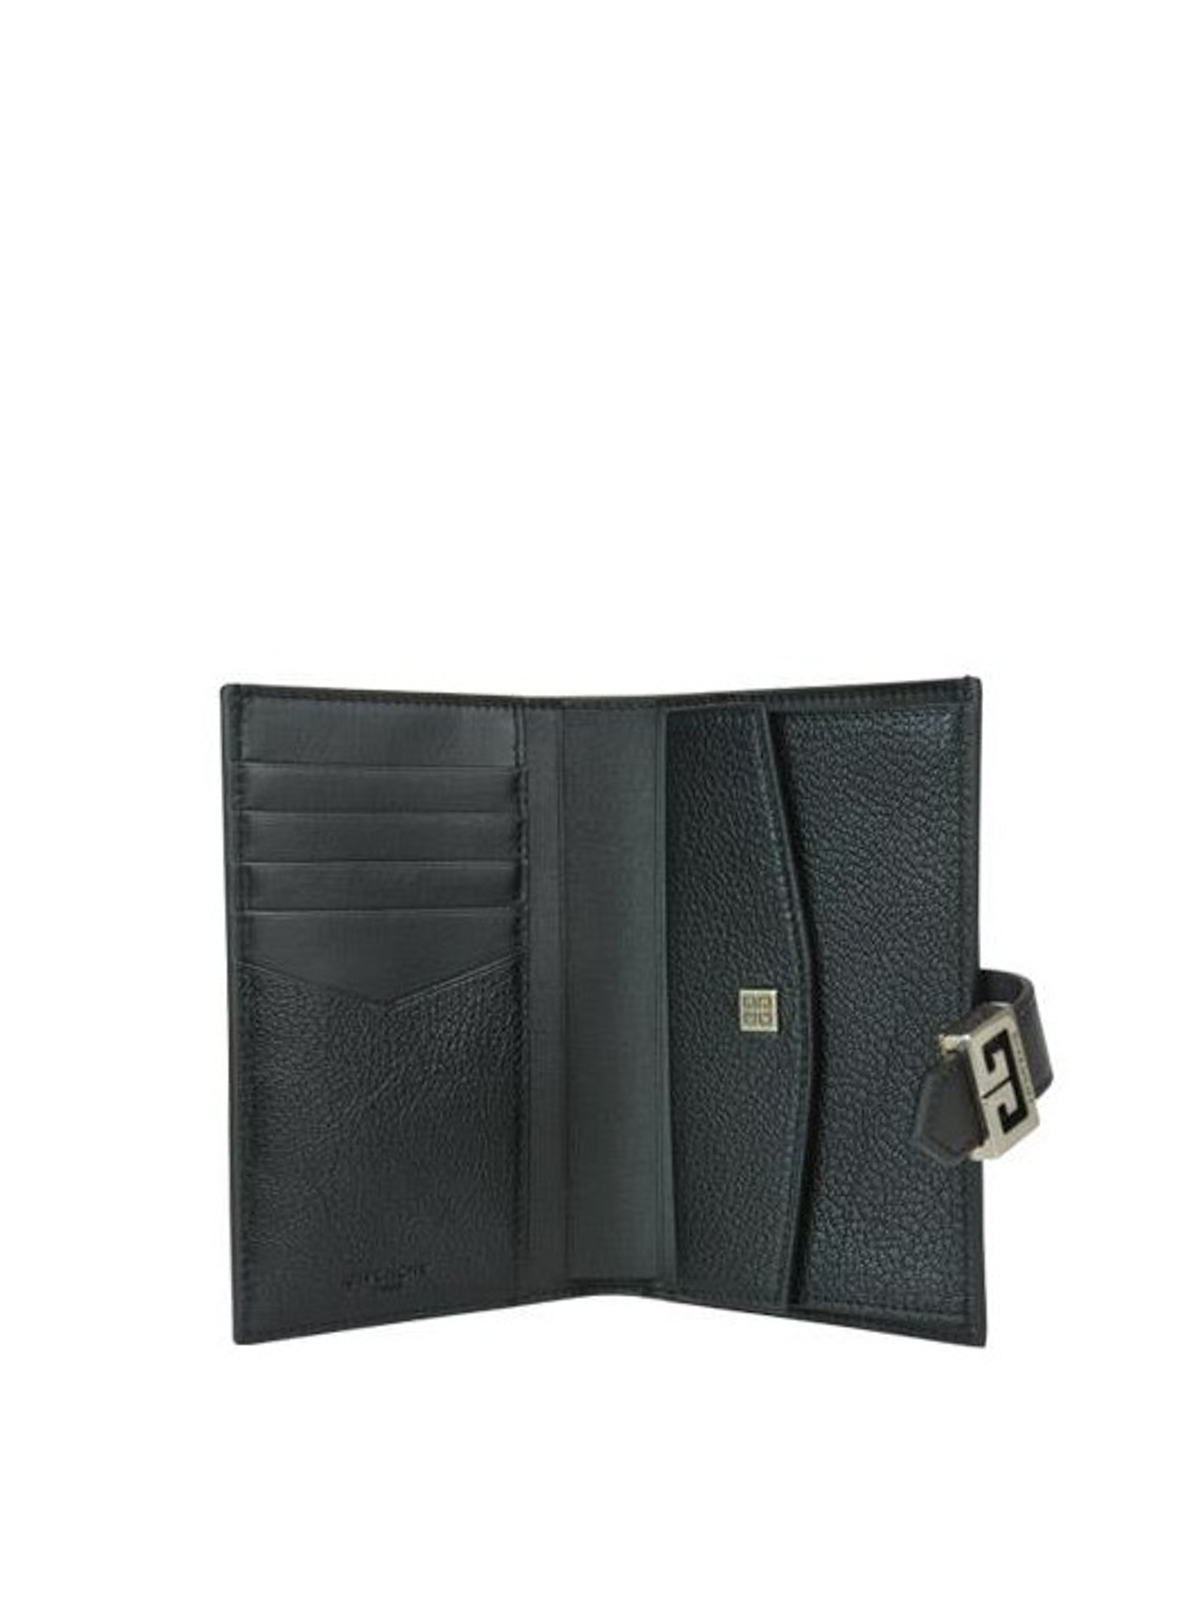 Givenchy - GV3 medium leather wallet 